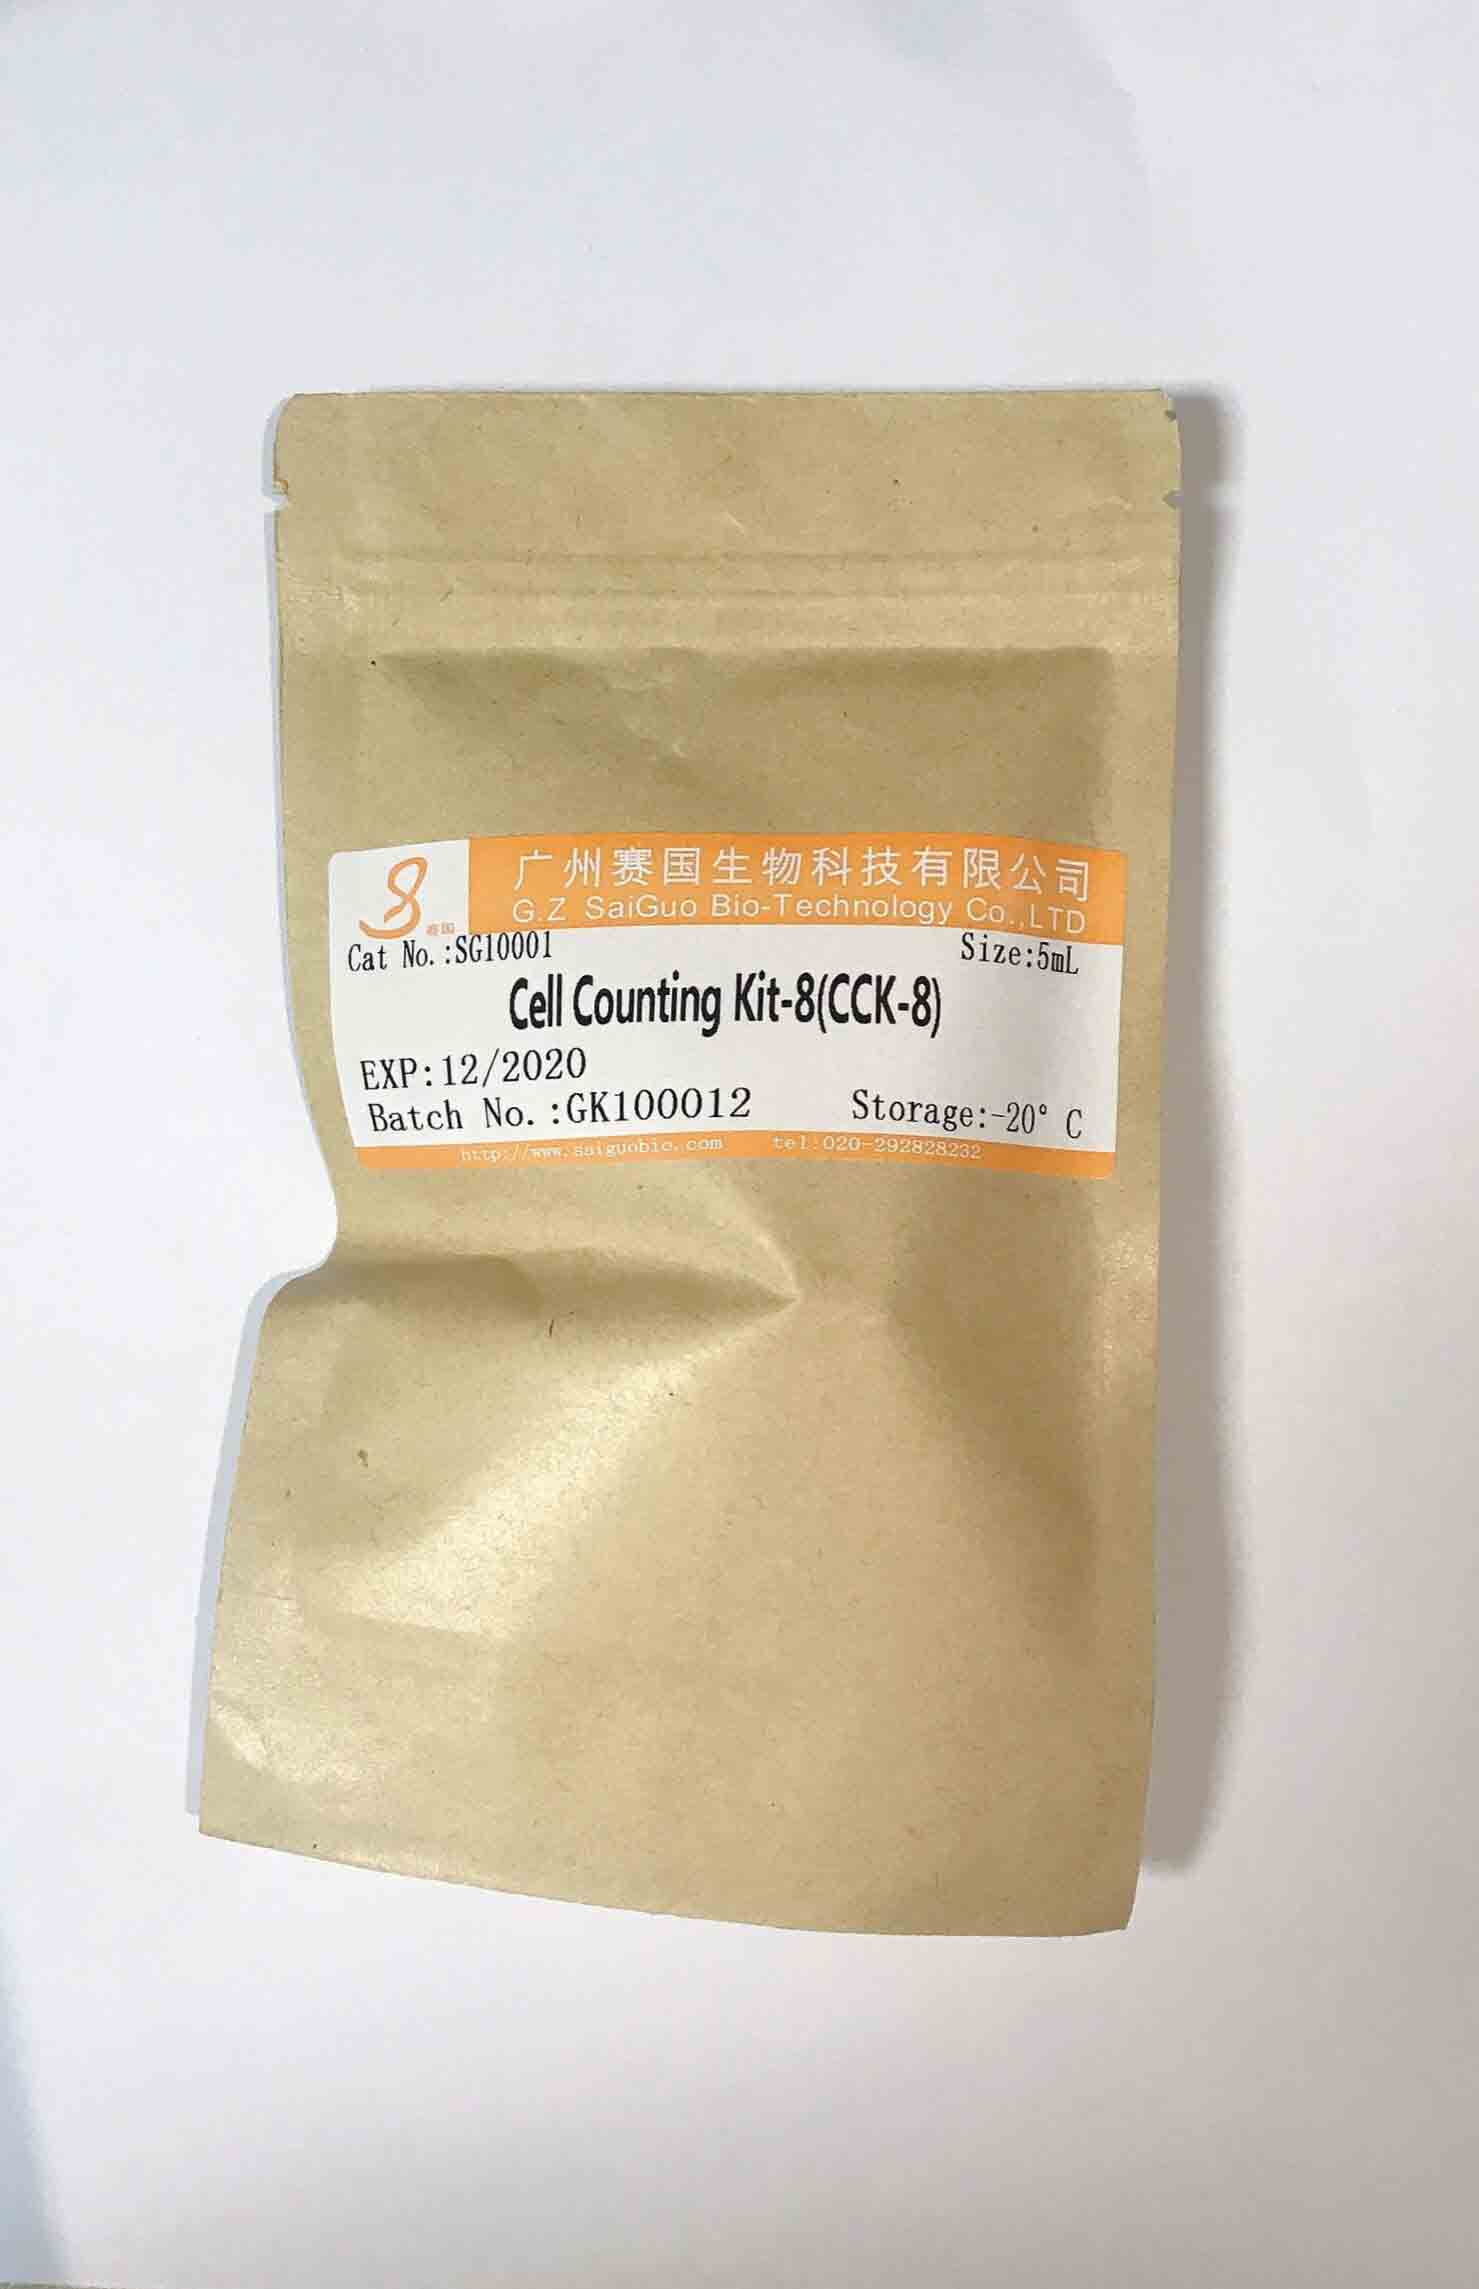 SG10001，国产，Cell Counting Kit-8(CCK-8)